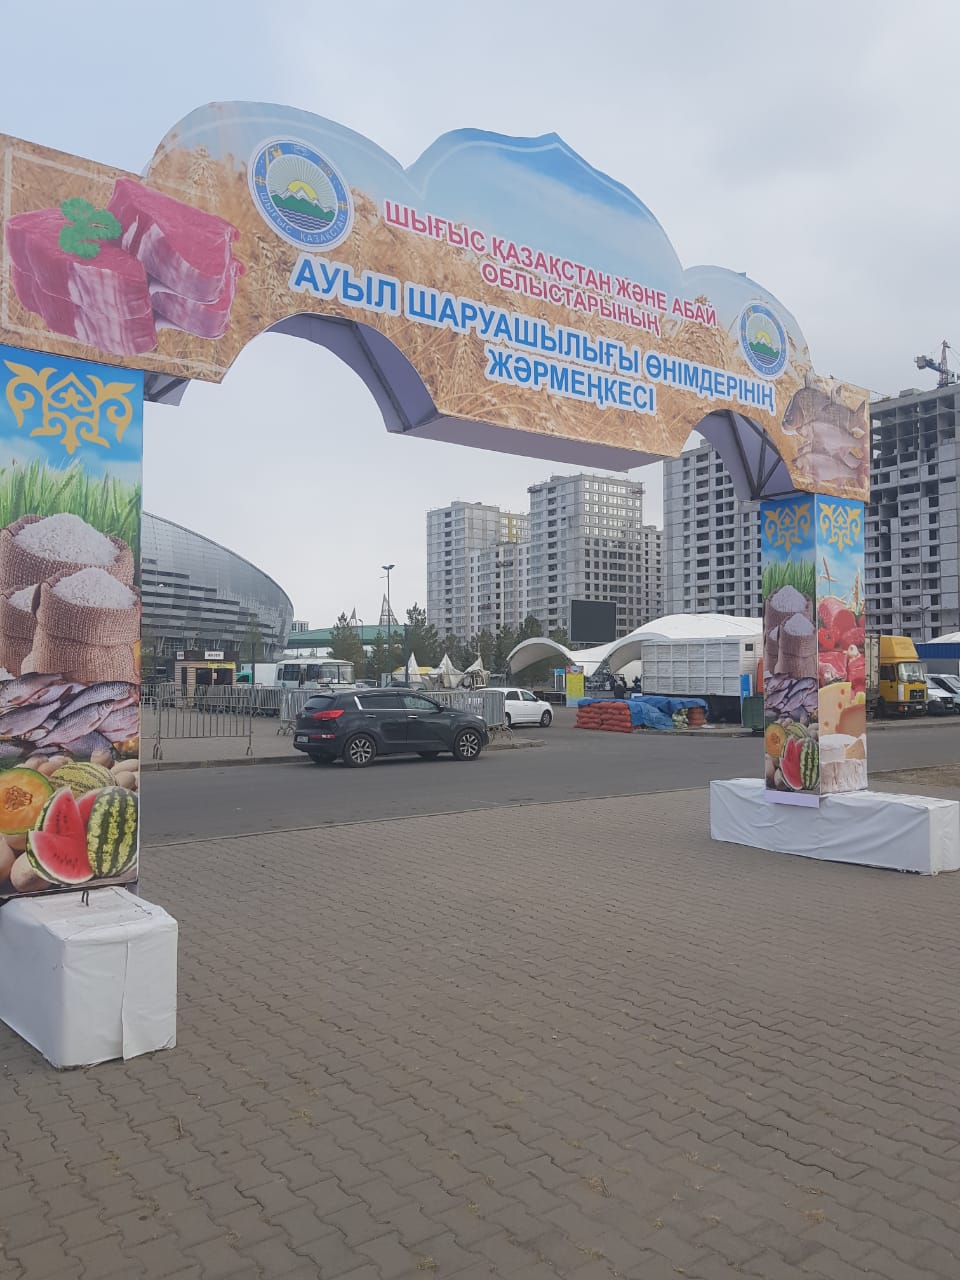 On October 1-2, 2022, the annual fair of agricultural products of the East Kazakhstan region was held in Astana